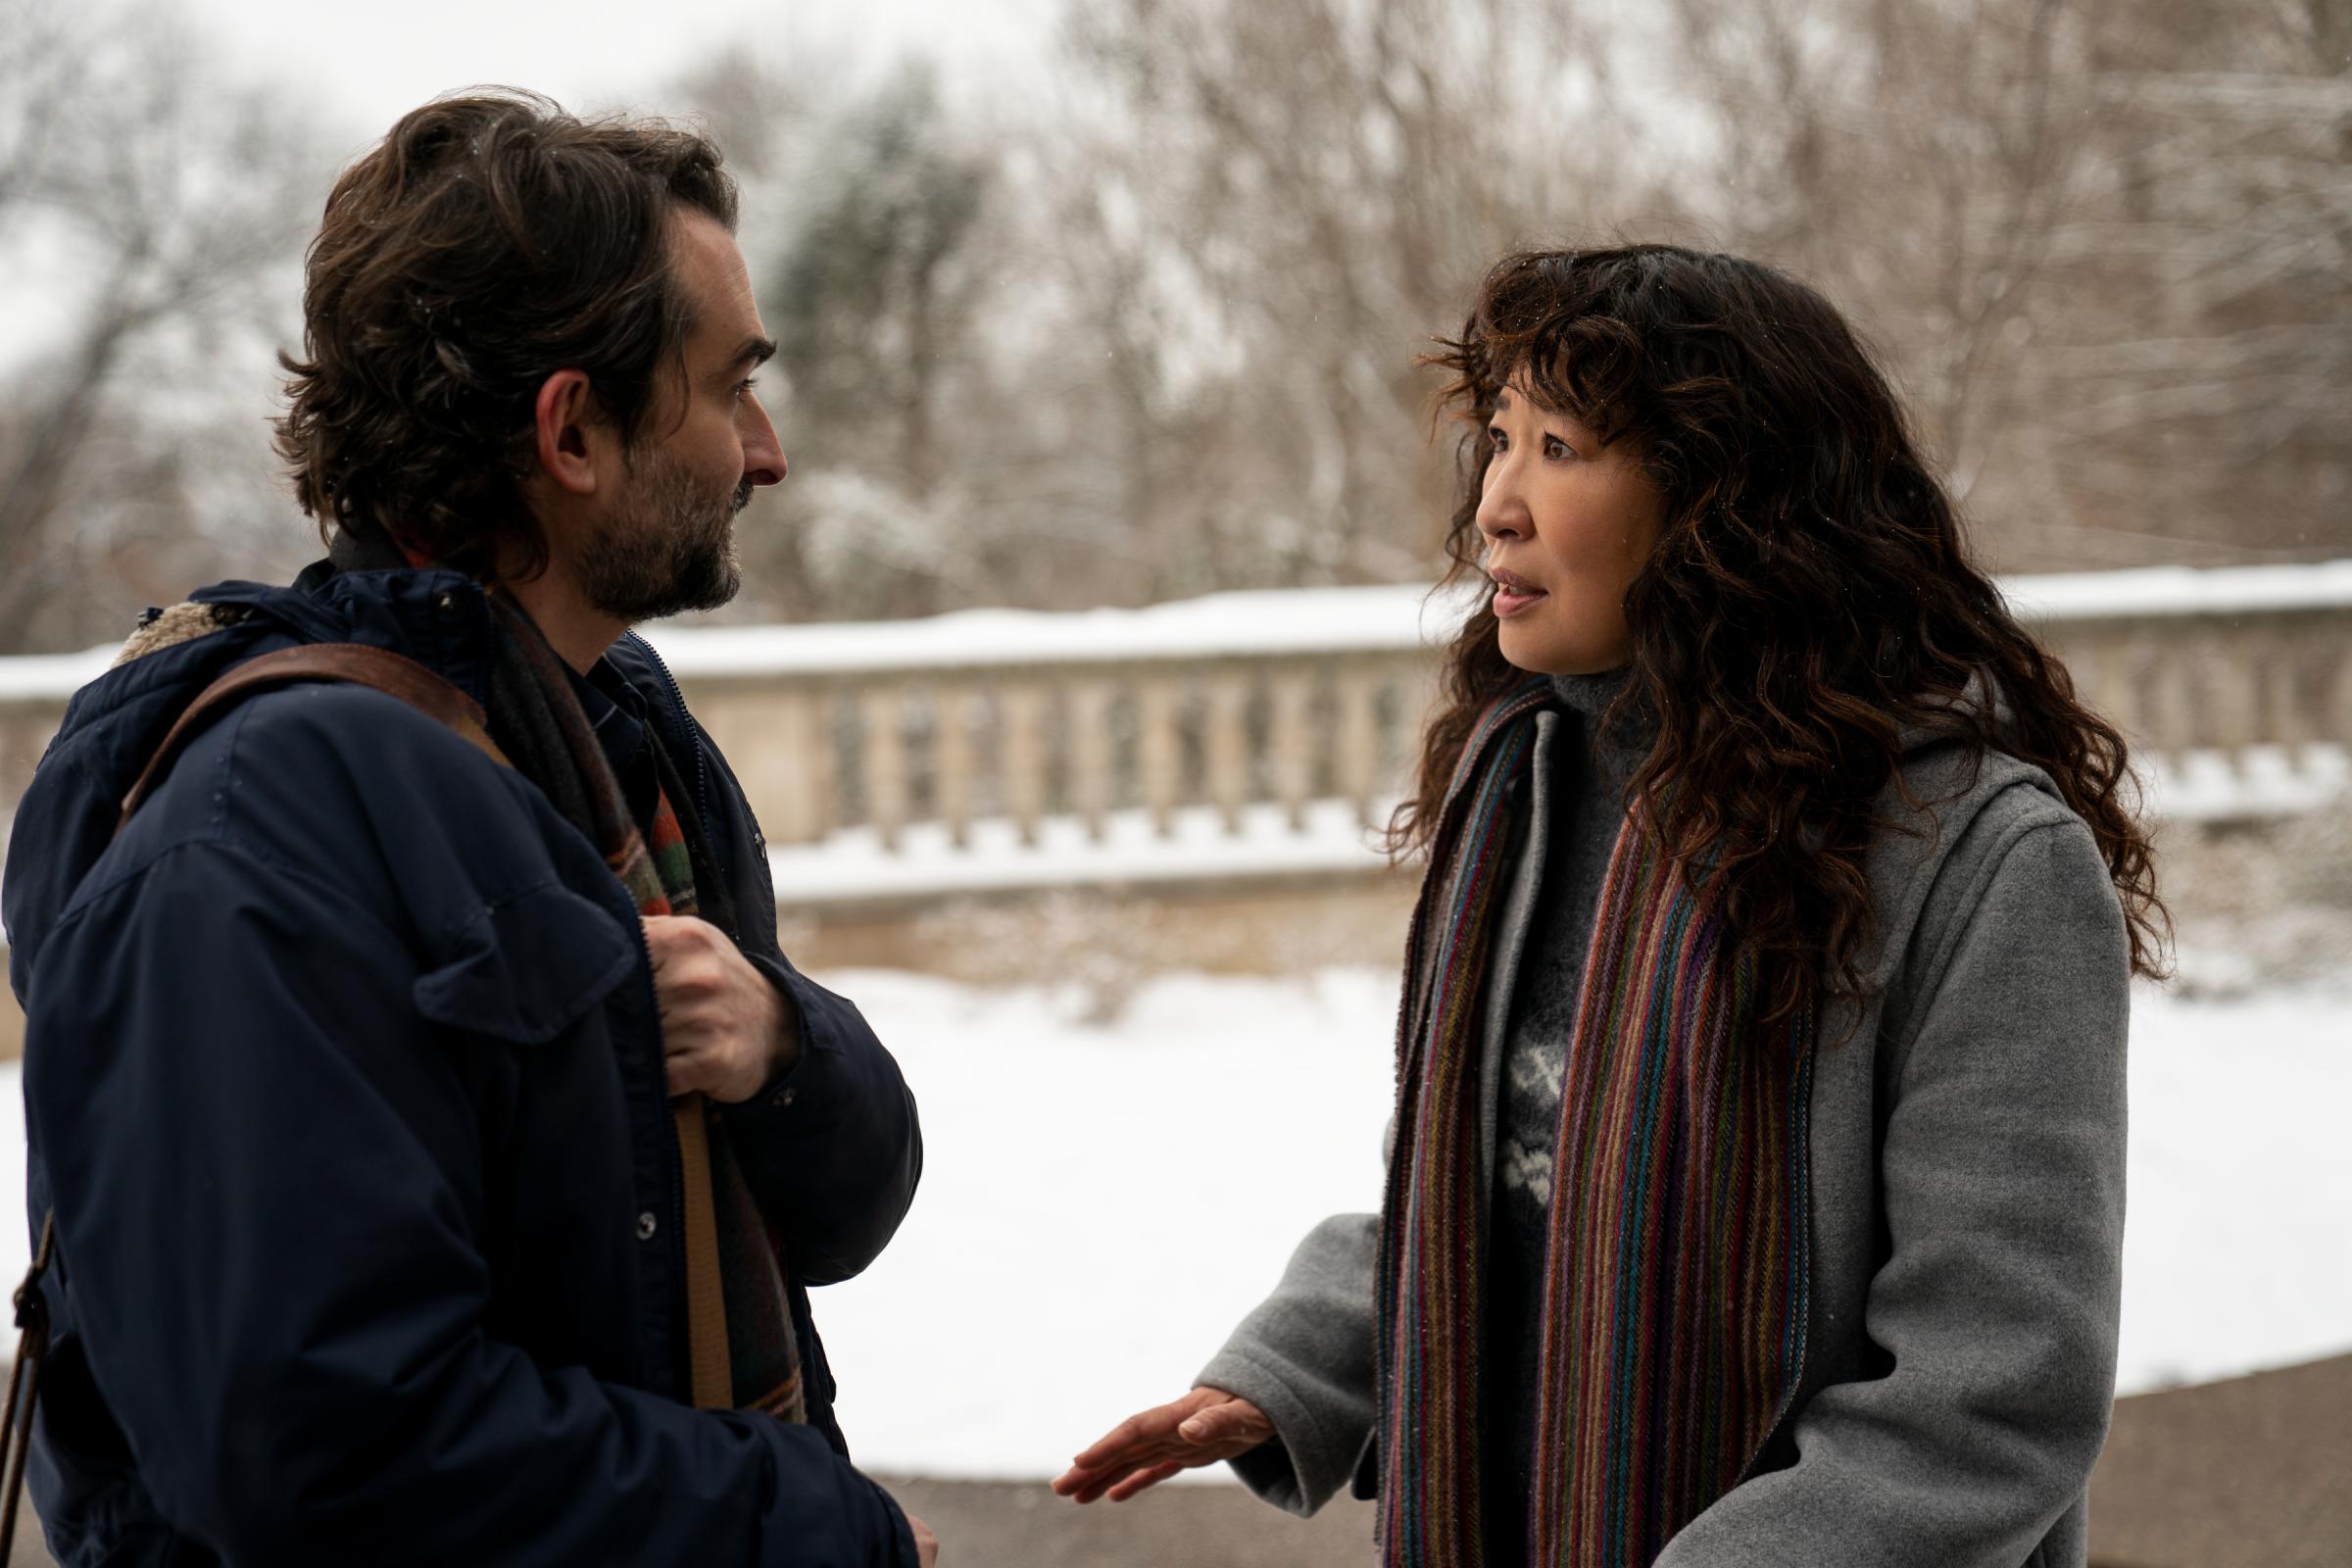 THE CHAIR (L to R) JAY DUPLASS as BILL and SANDRA OH as JI-YOON in episode 101 of THE CHAIR Cr. ELIZA MORSE/NETFLIX © 2021